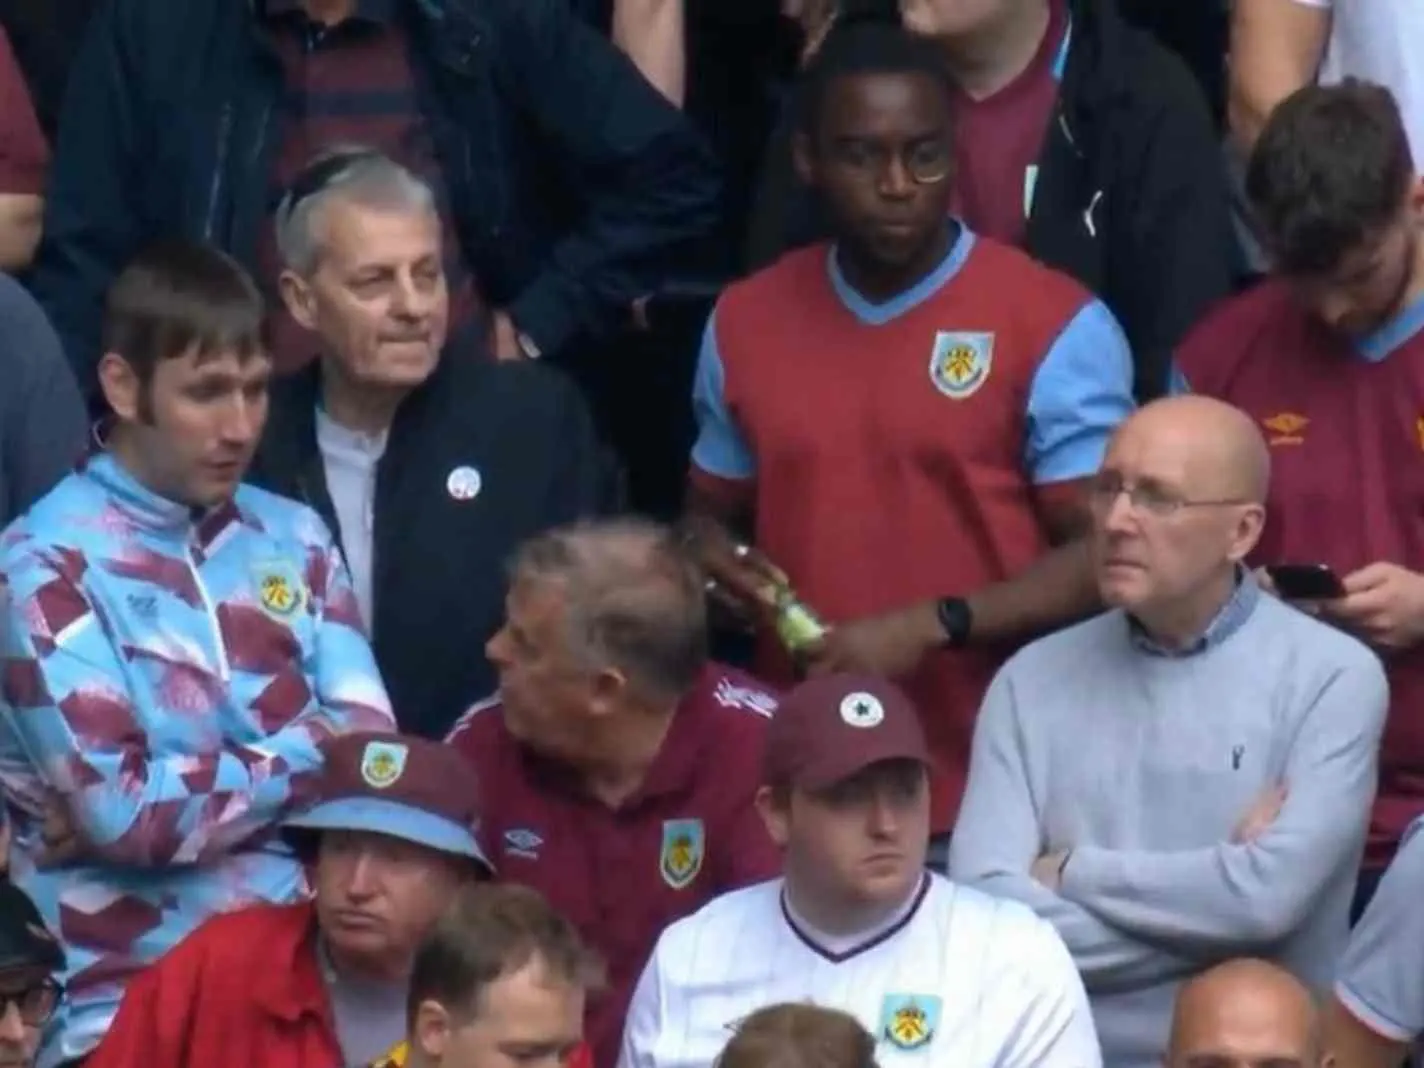 In this image - Burnley fans during the game against Tottenham Hotspur